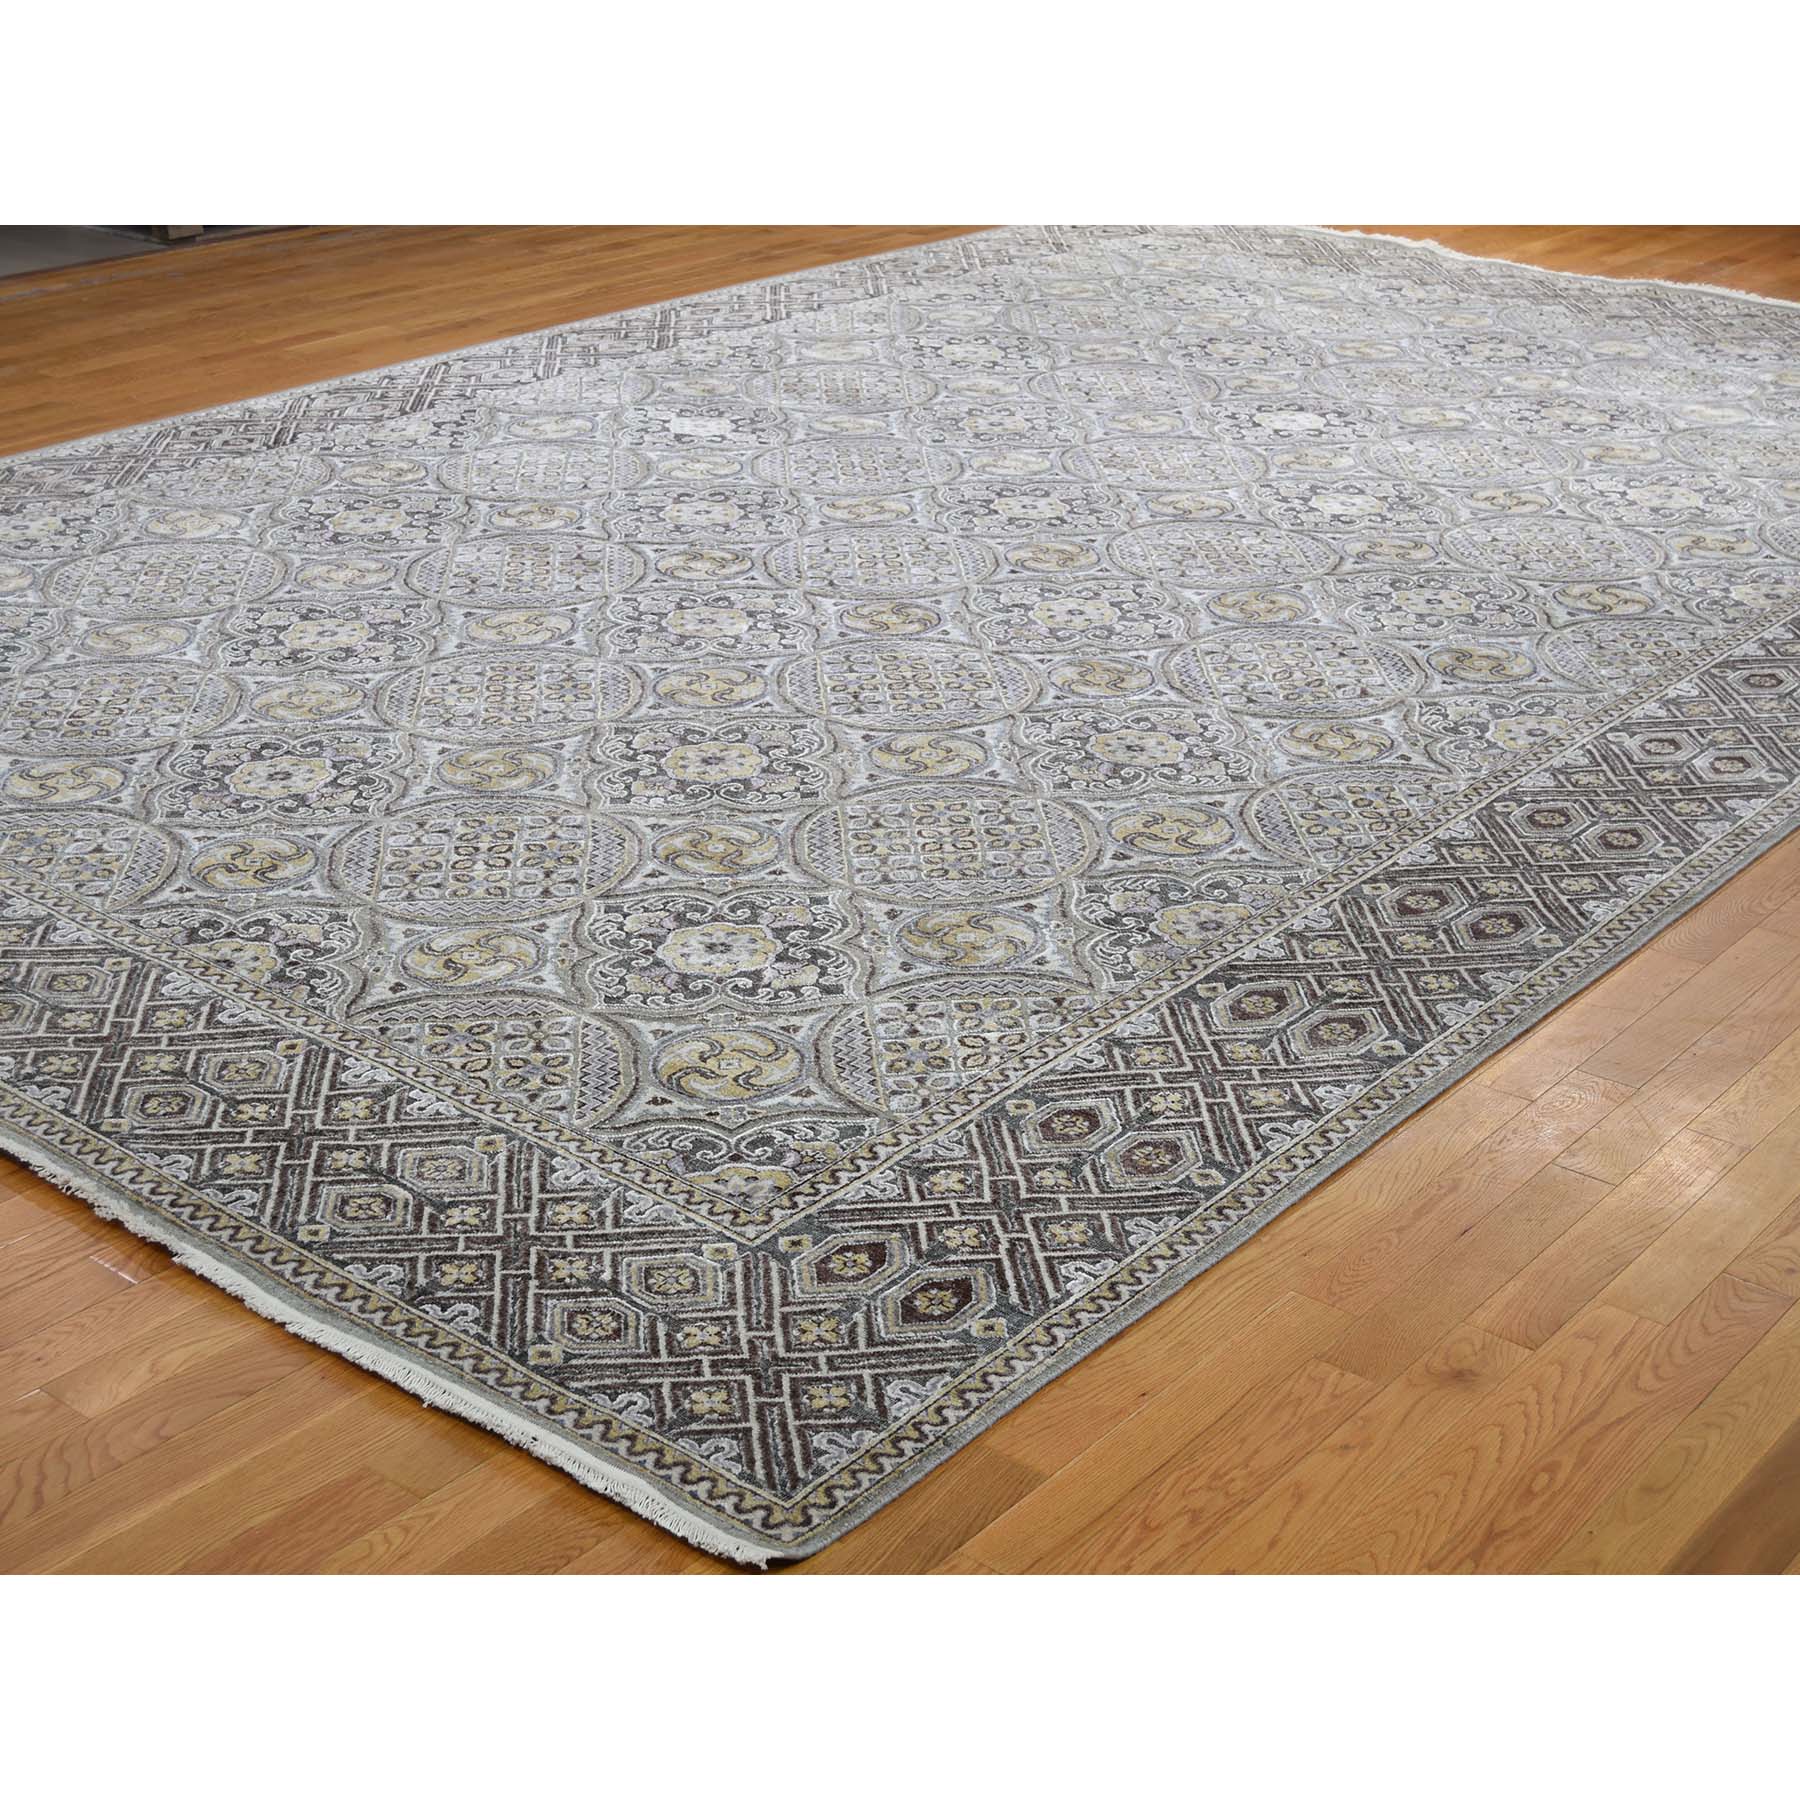 12'x18'6" Mughal Inspired Medallions Design Textured Wool and Silk Oversize Hand Woven Oriental Rug 